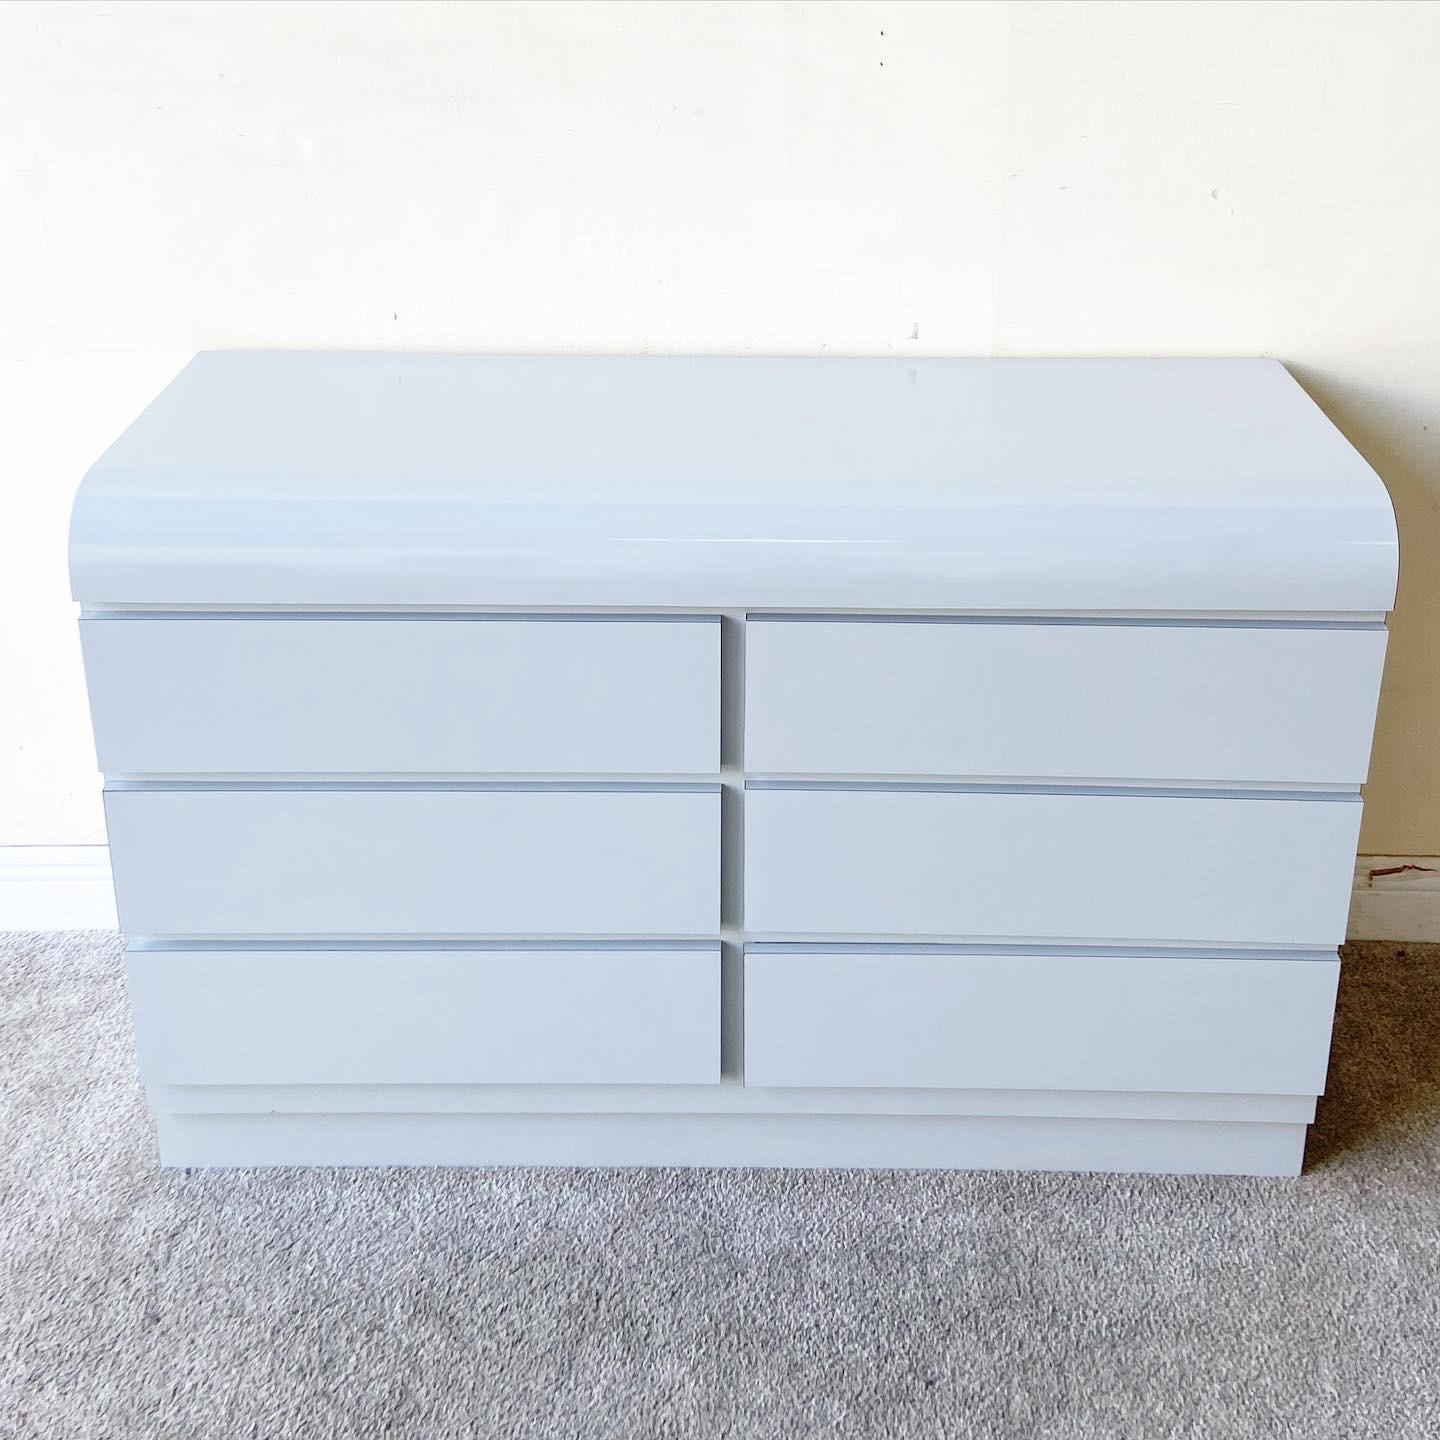 Amazing postmodern waterfall lowboy Dresser. Feature a grey lacquer laminate with 6 spacious drawers.

Additional information:
Materials: Wood
Color: Gray
Style: Postmodern
Time Period: 1980s
Place of Origin: USA
Dimensions: 47.25ʺ W × 17.5ʺ D ×